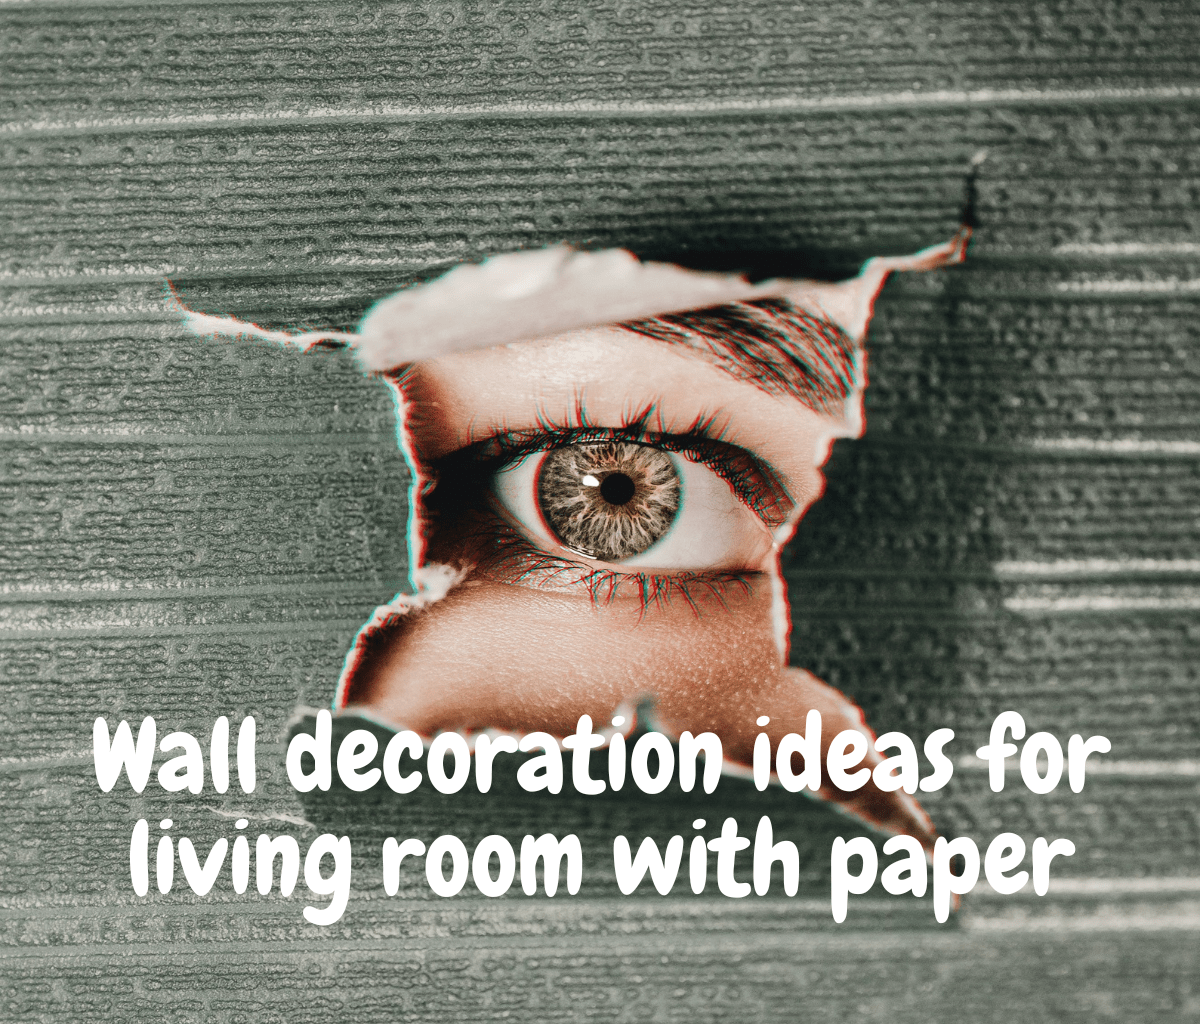 Wall decoration ideas for living room with paper